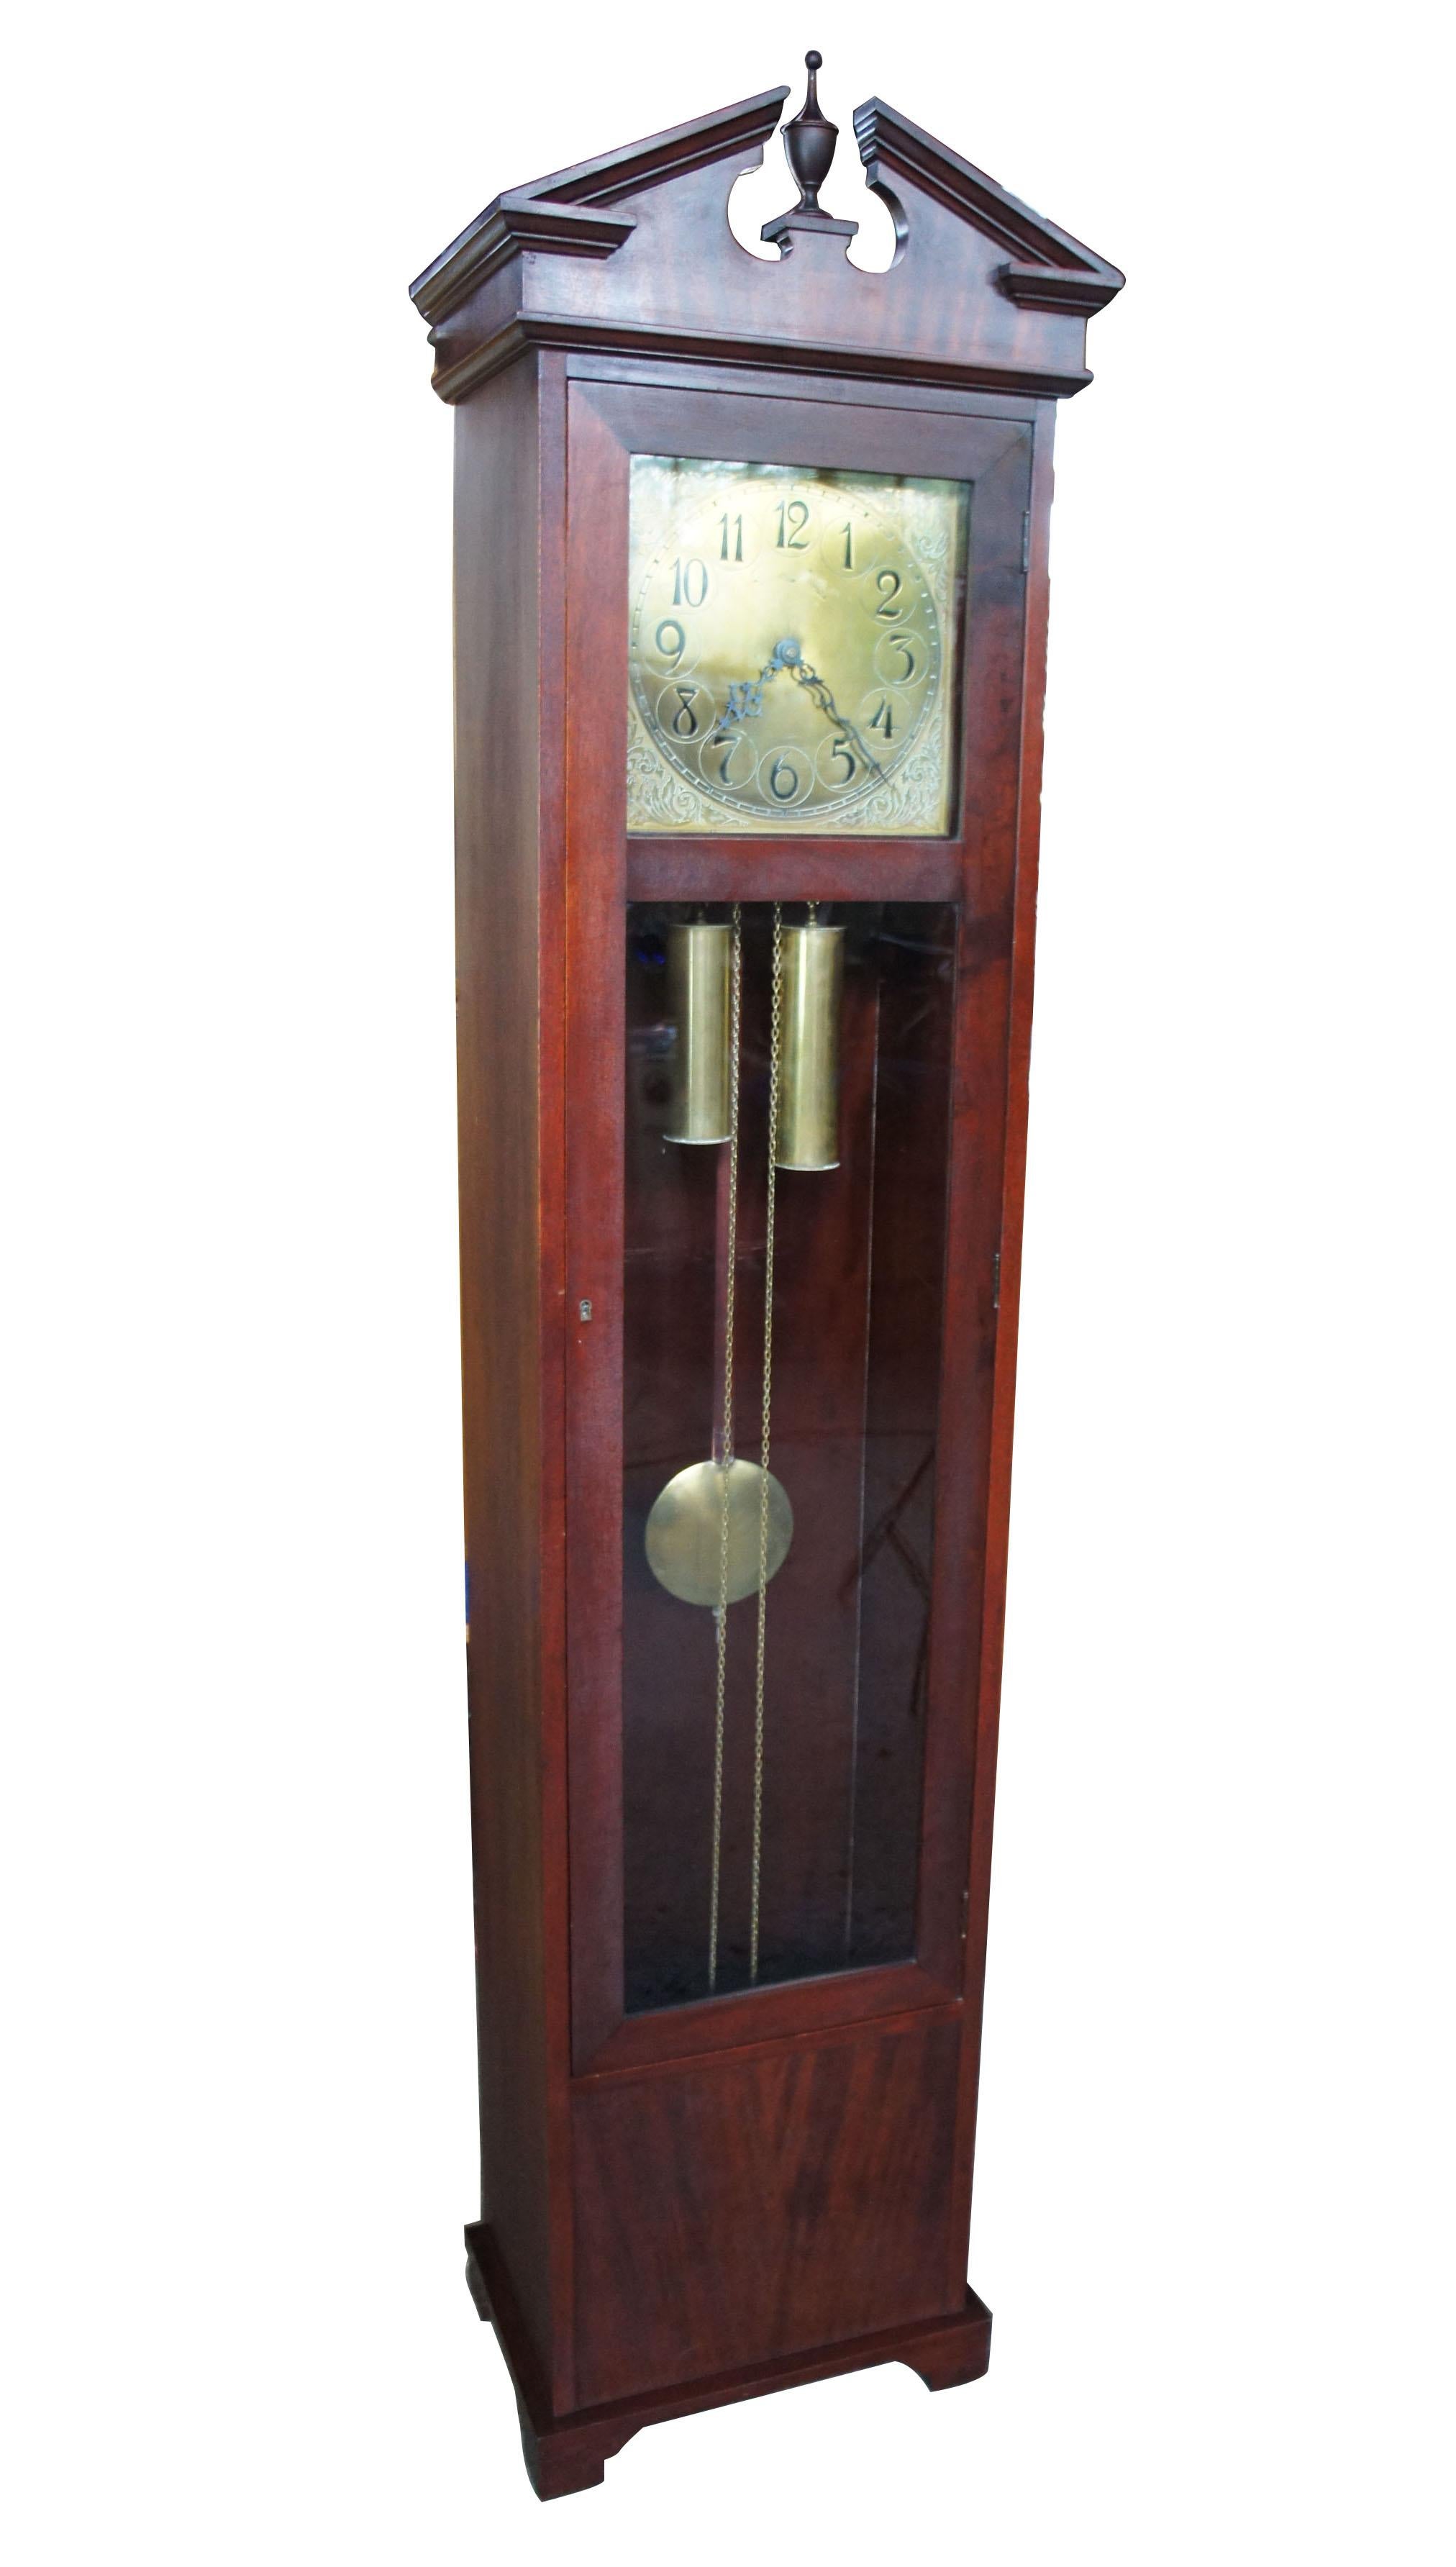 Antique Colonial Mfg Co Empire style mahogany grandfather clock German movement

Colonial manufacturing antique grandfather clock, circa 1920s. An empire style mahogany case with open pediment and trophy finial. The movement is stamped Germany.